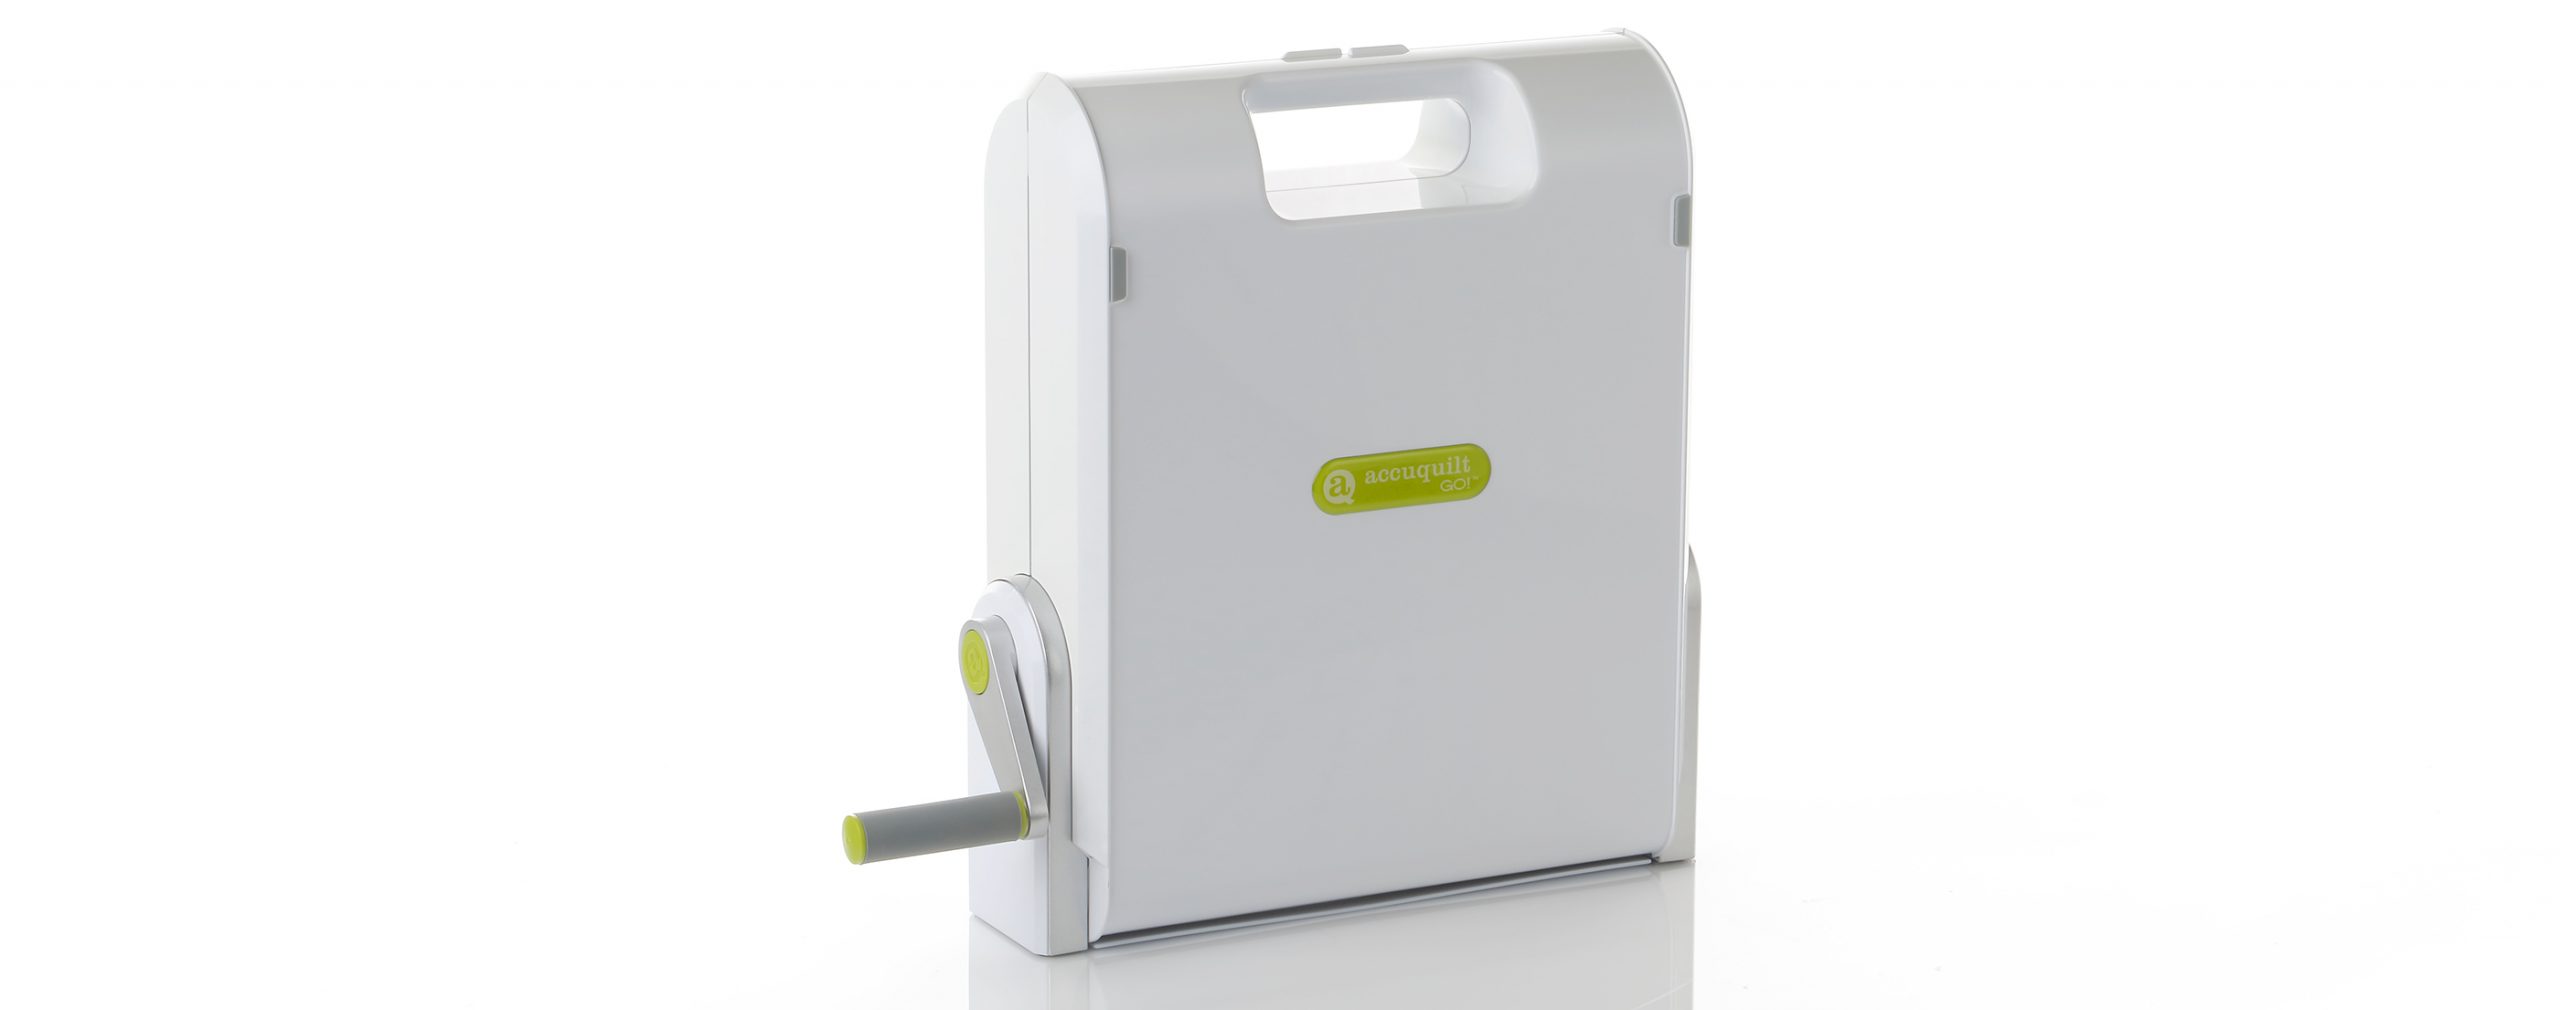 The AccuQuilt Go!, closed and standing upright. The hand crank is point to the left.